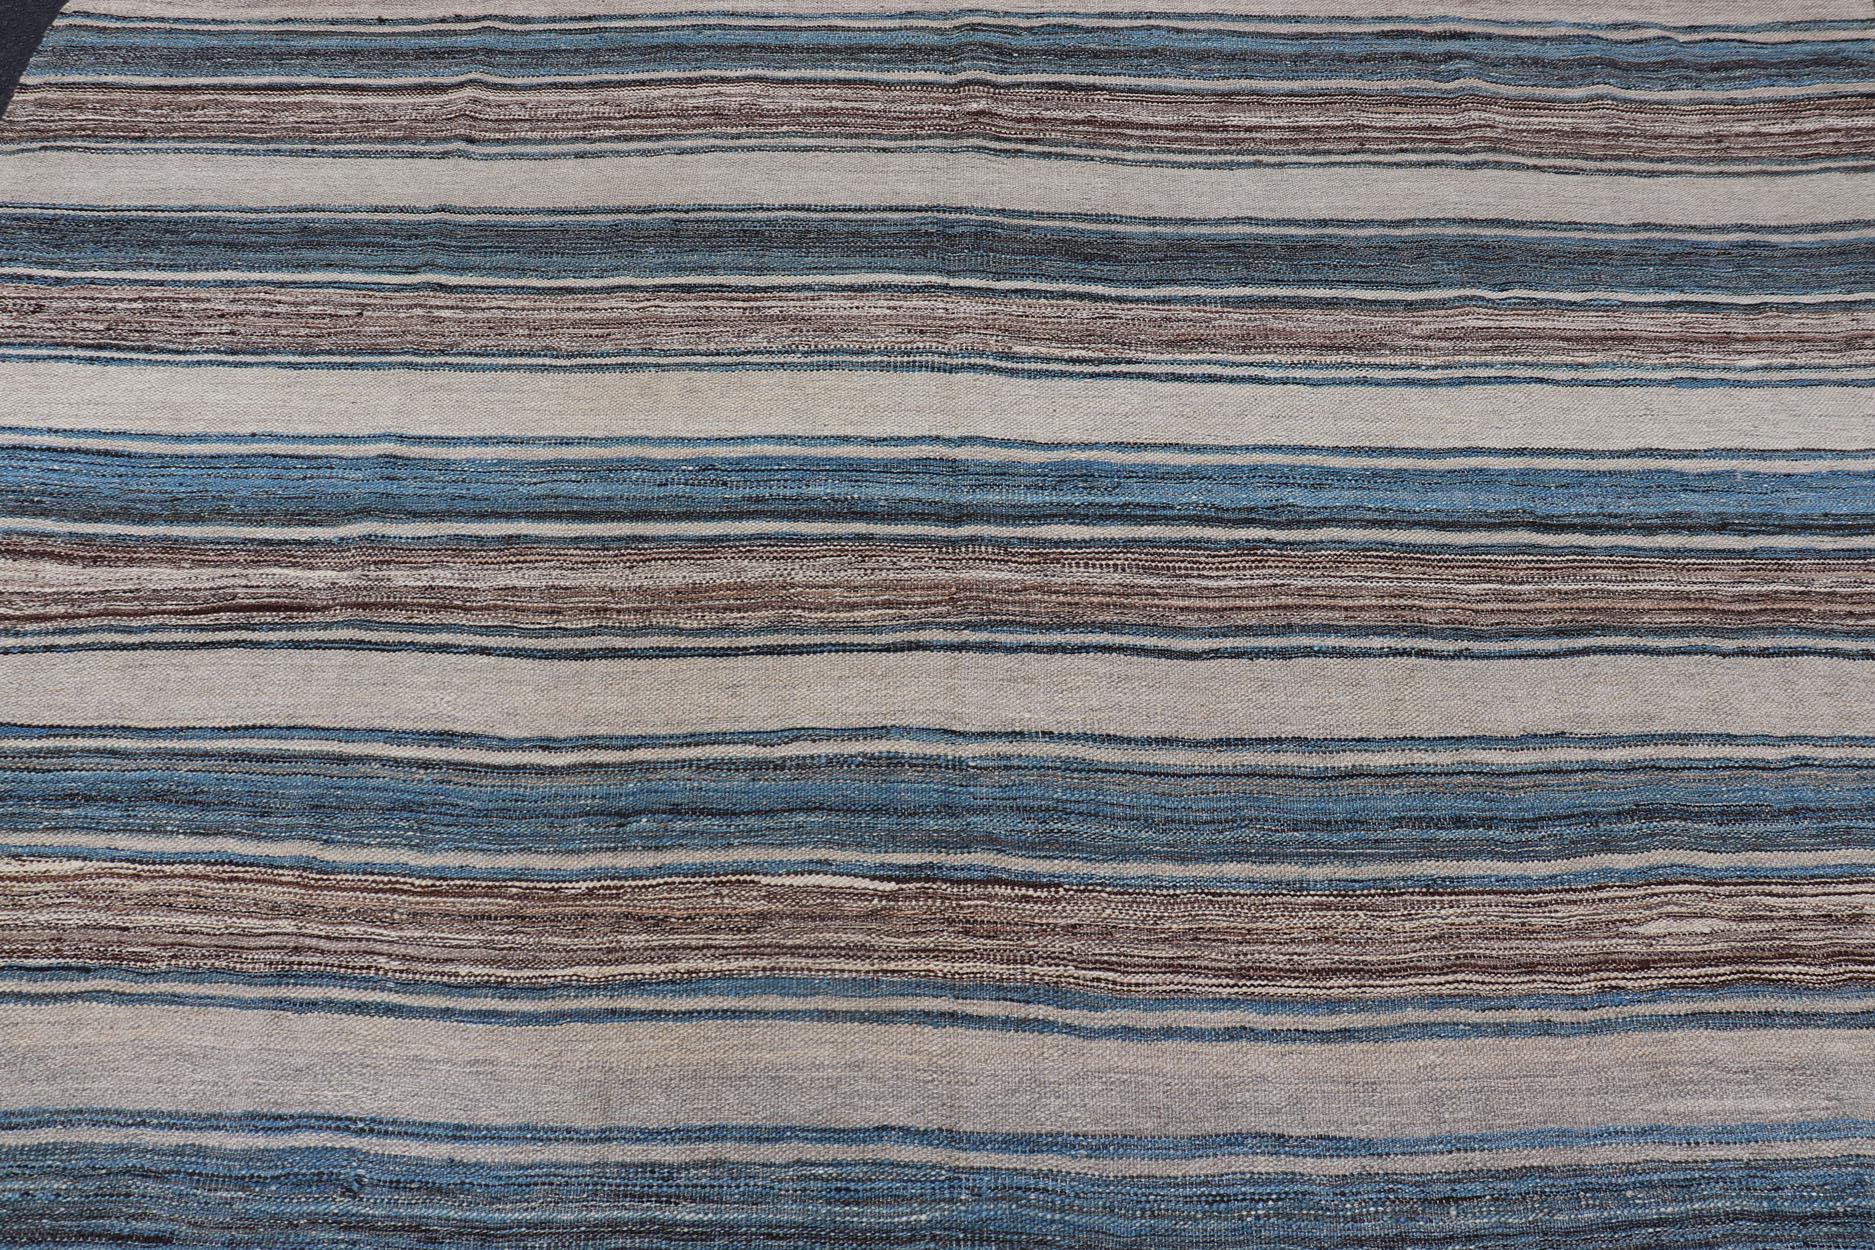 Versatile Striped Design and Natural Brown, Cream, and Blue Flat-Weave Kilim For Sale 4